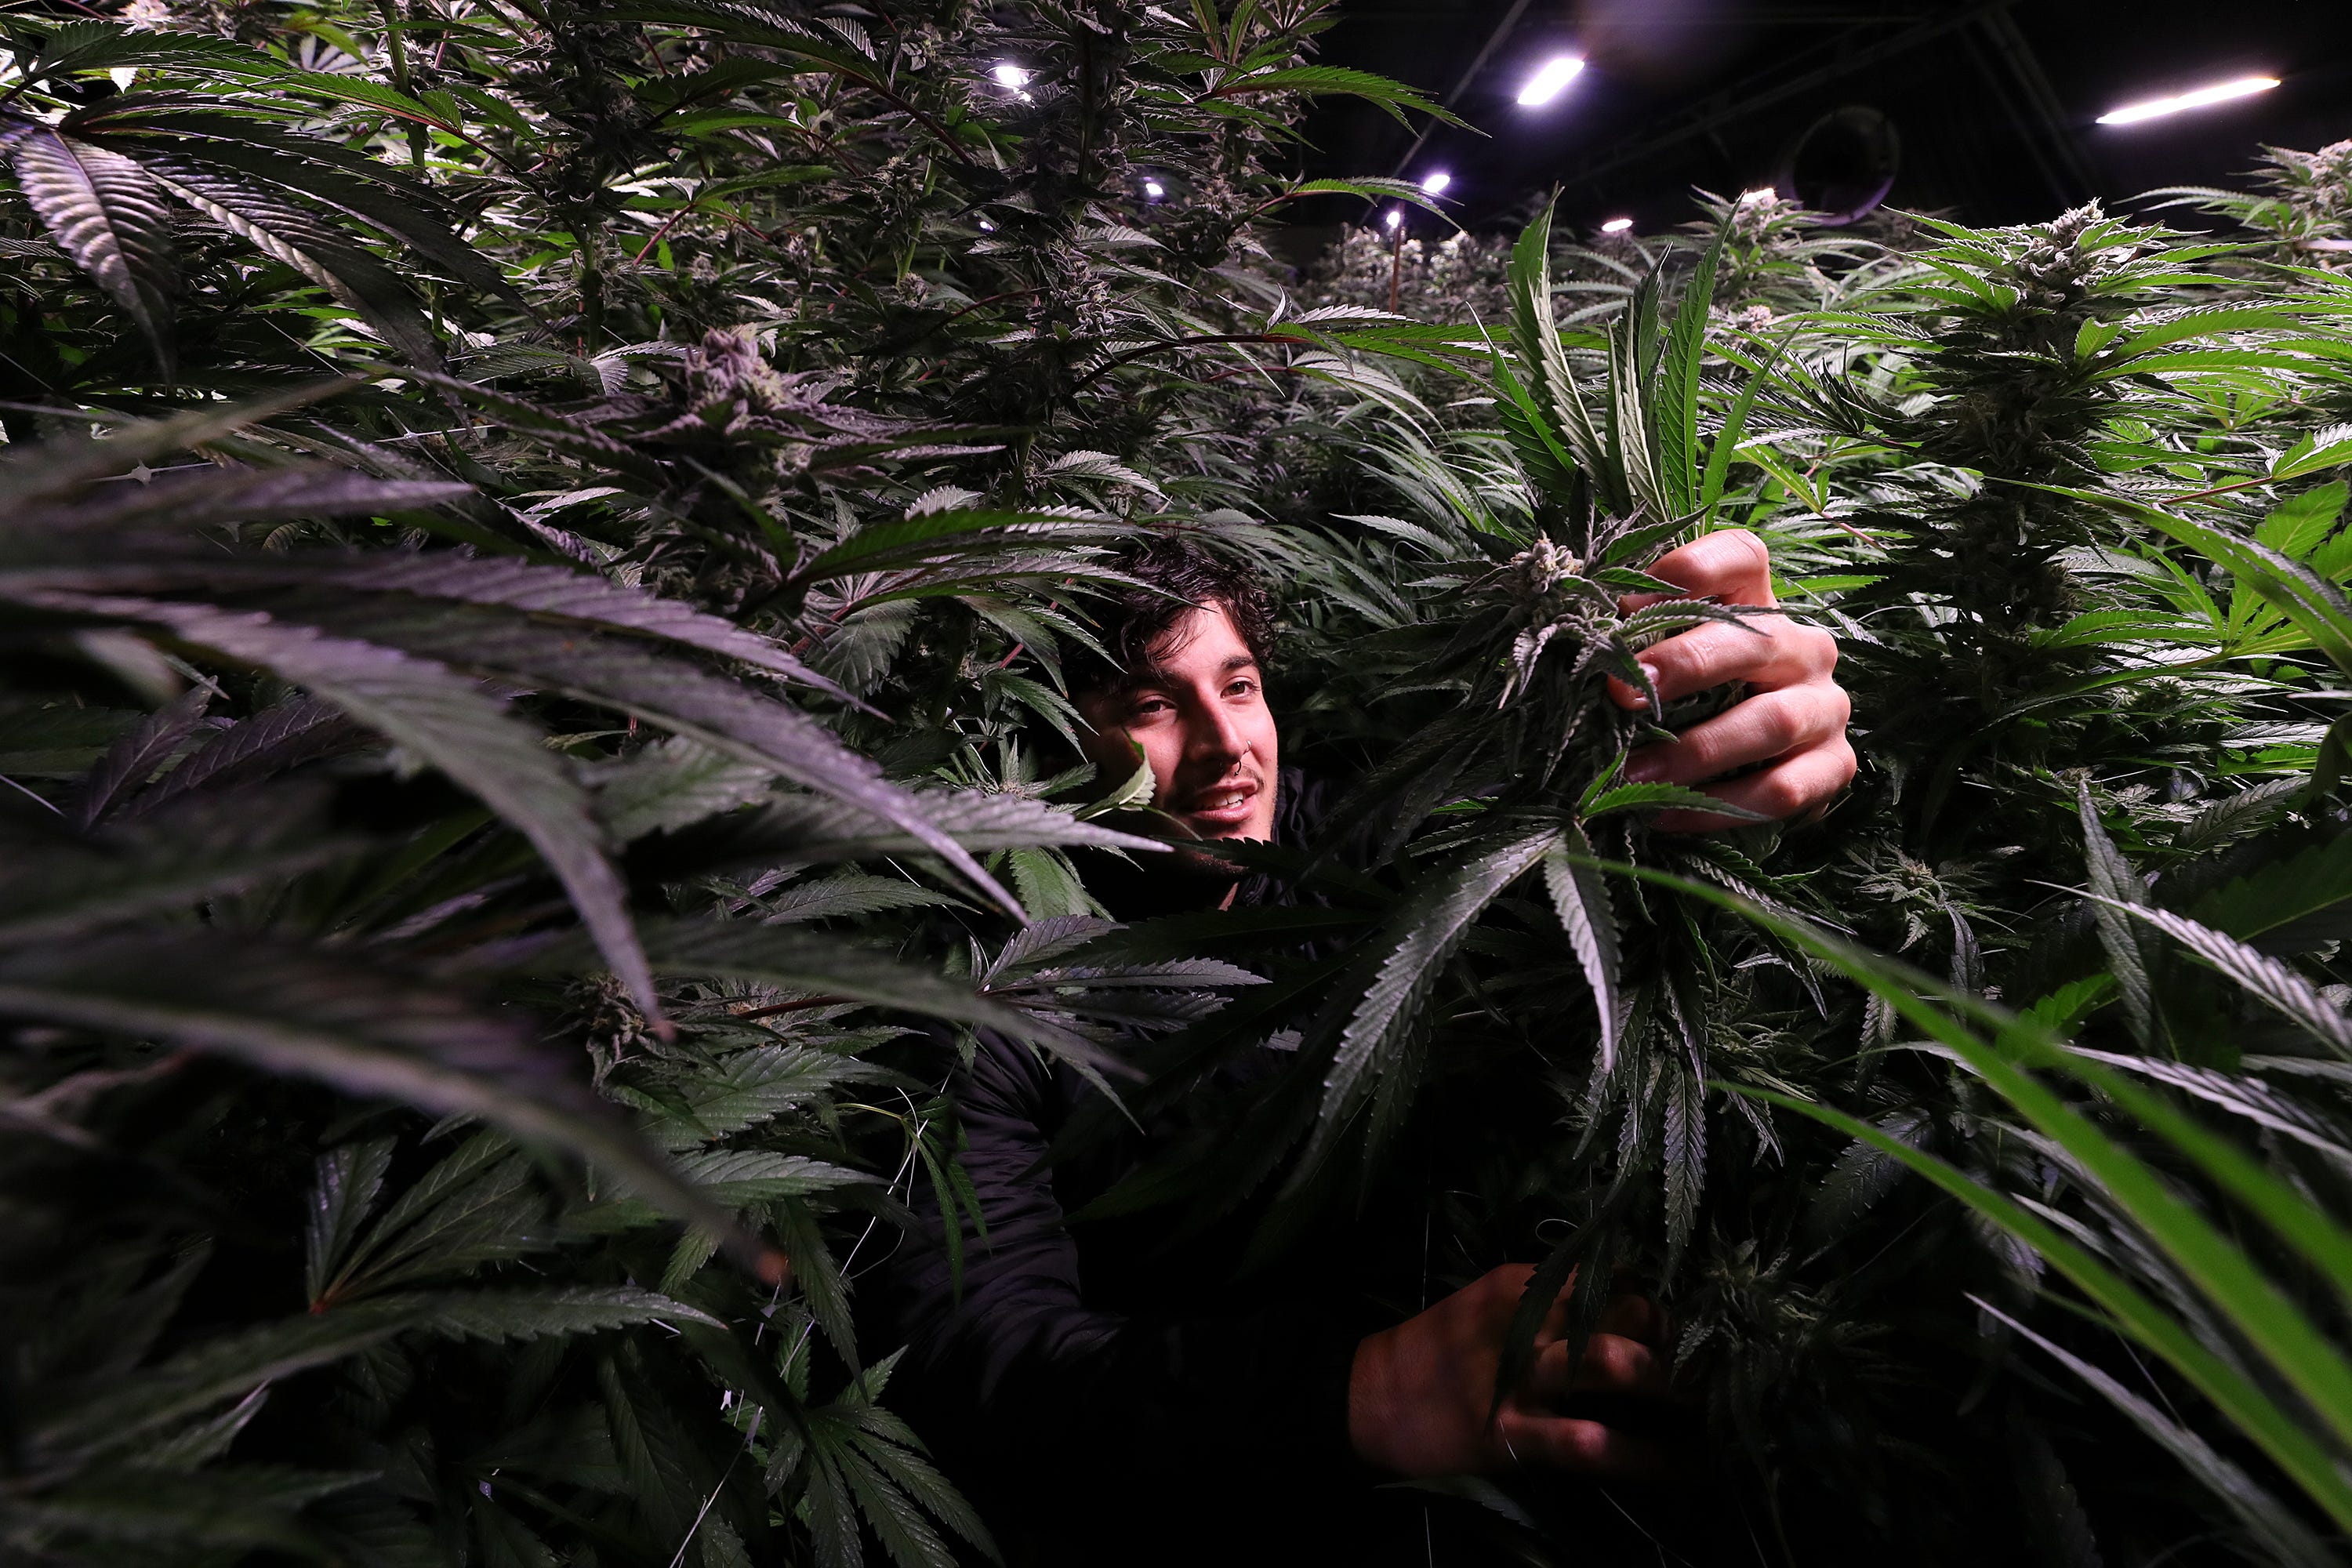 Iker Muñoz shows off his friends’ licensed grow operation, Mendo Select, in the Mendocino County town of  Potter Valley. There are 10 greenhouses on the property. Co-owner Dave Najera, a former U.S. Marine, said that he was drawn to the plant's medicinal properties in treating PTSD.